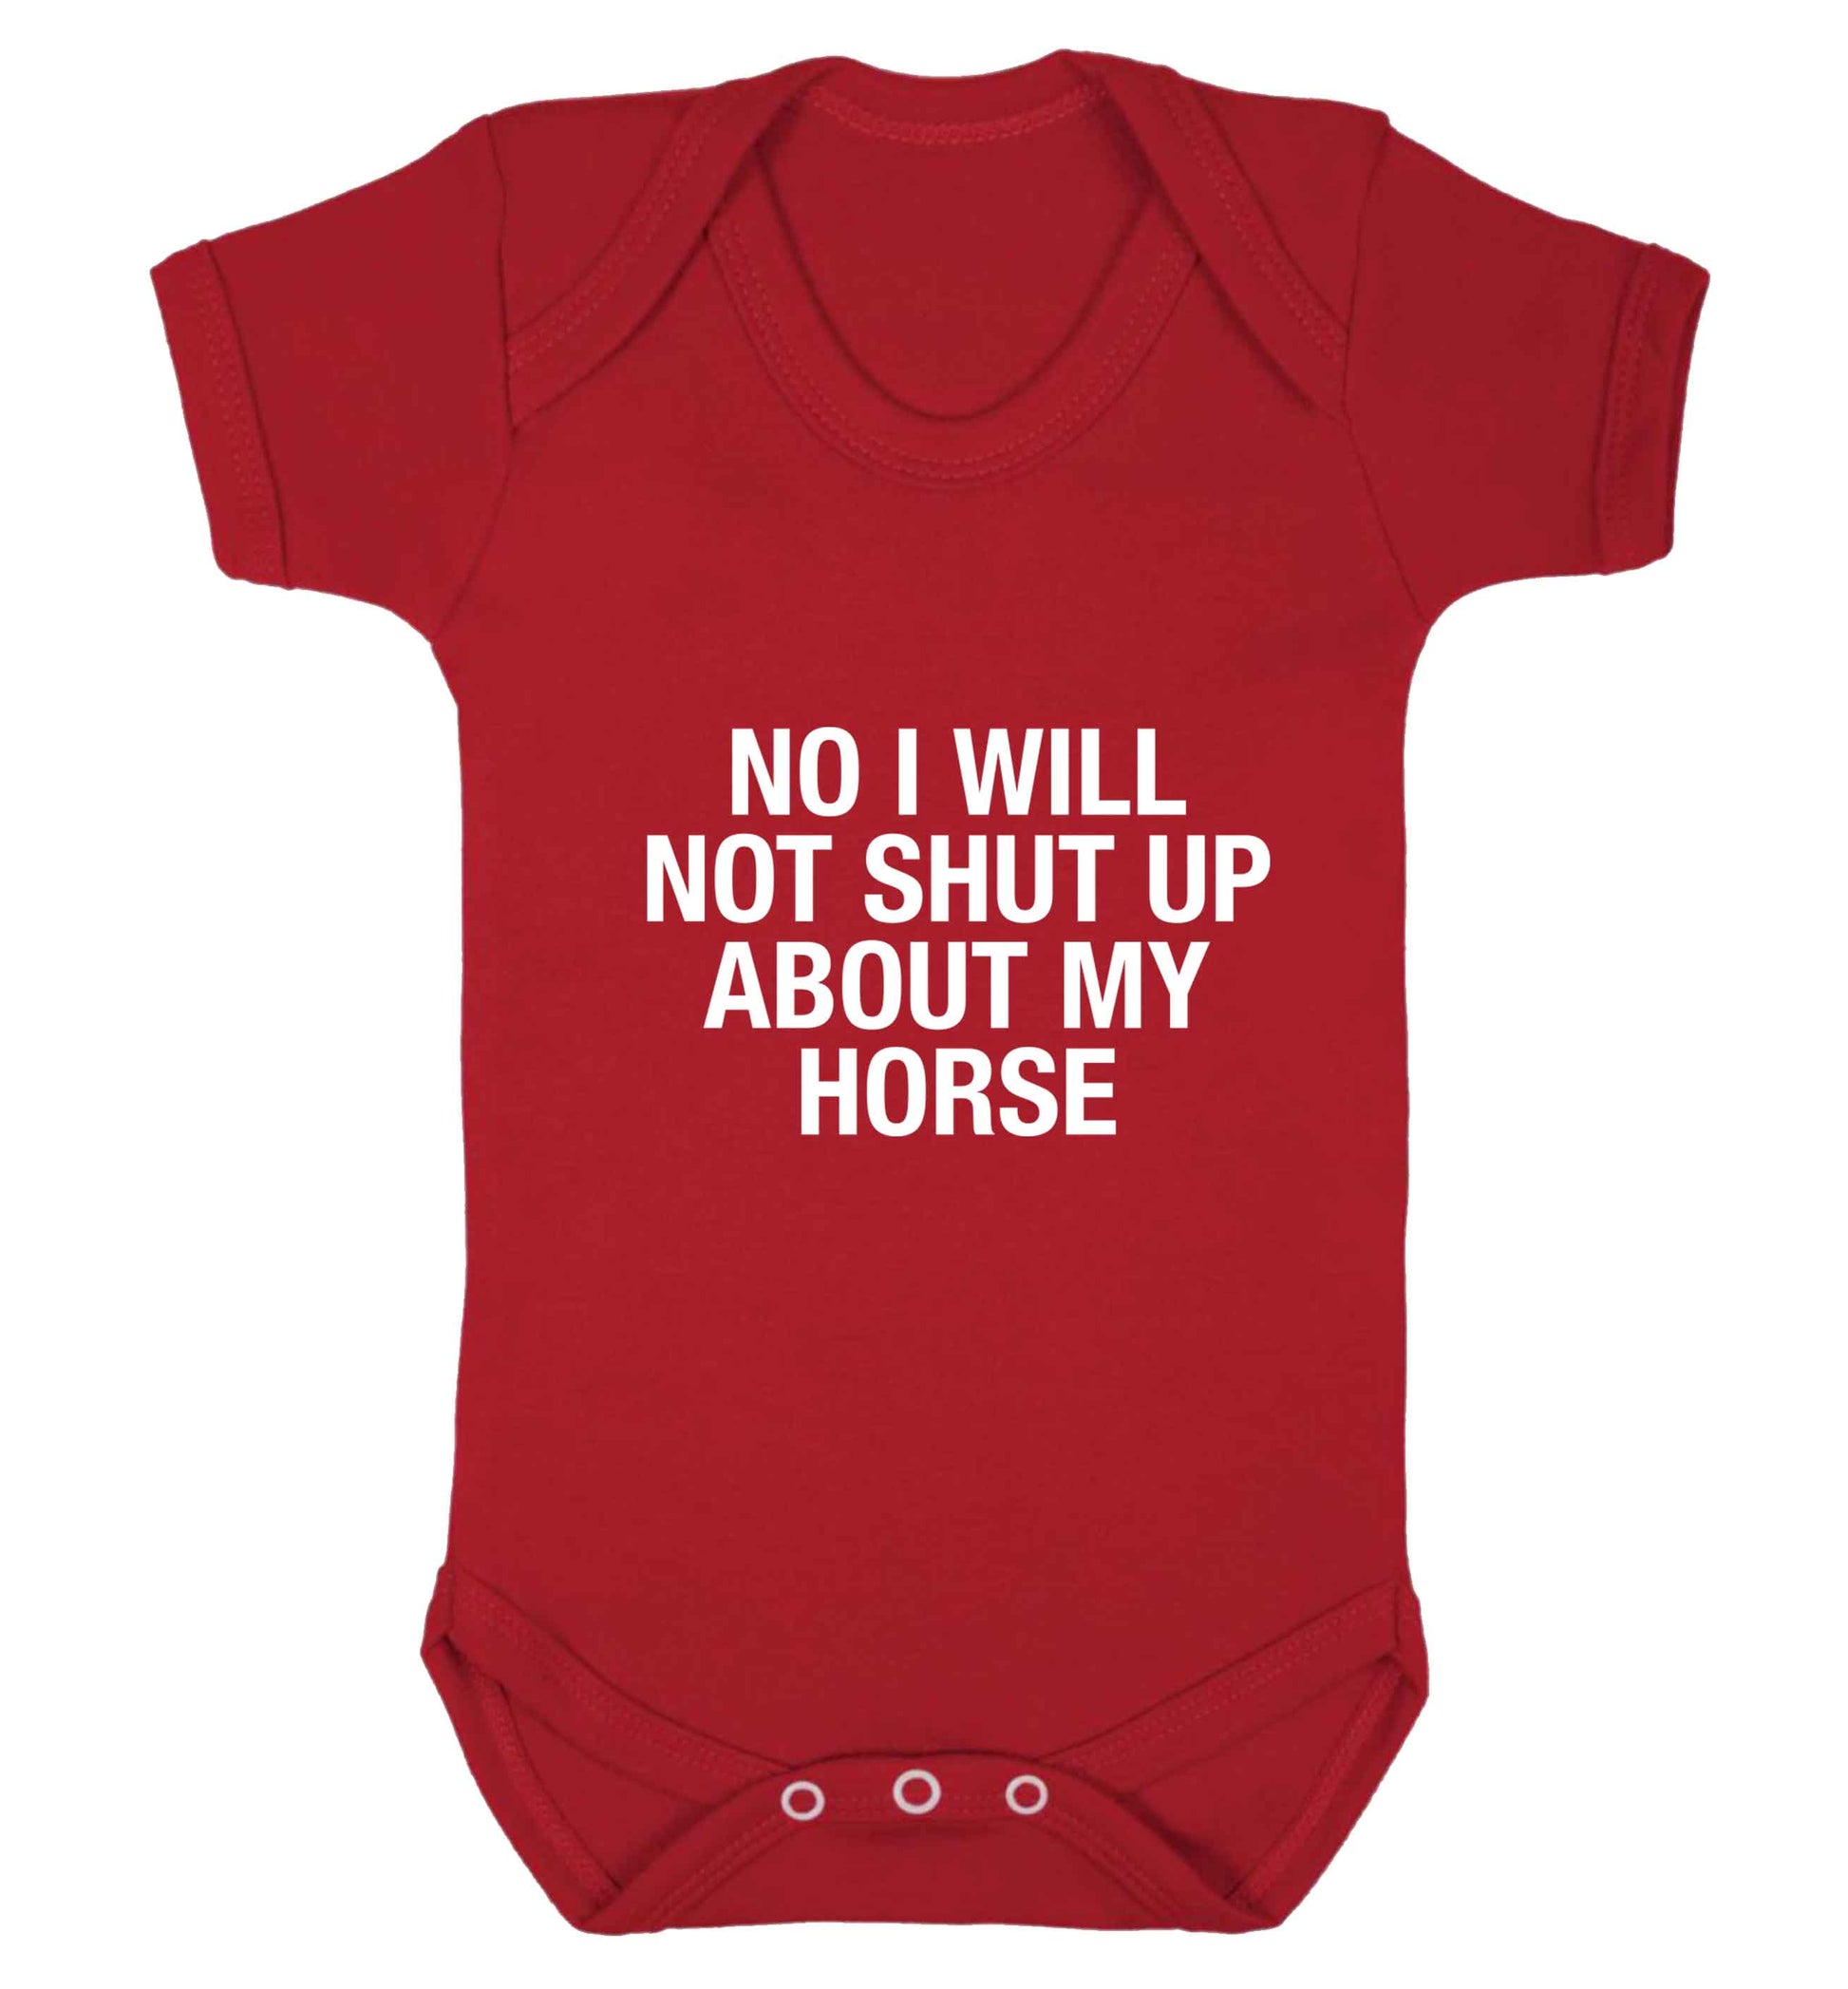 No I will not shut up talking about my horse baby vest red 18-24 months